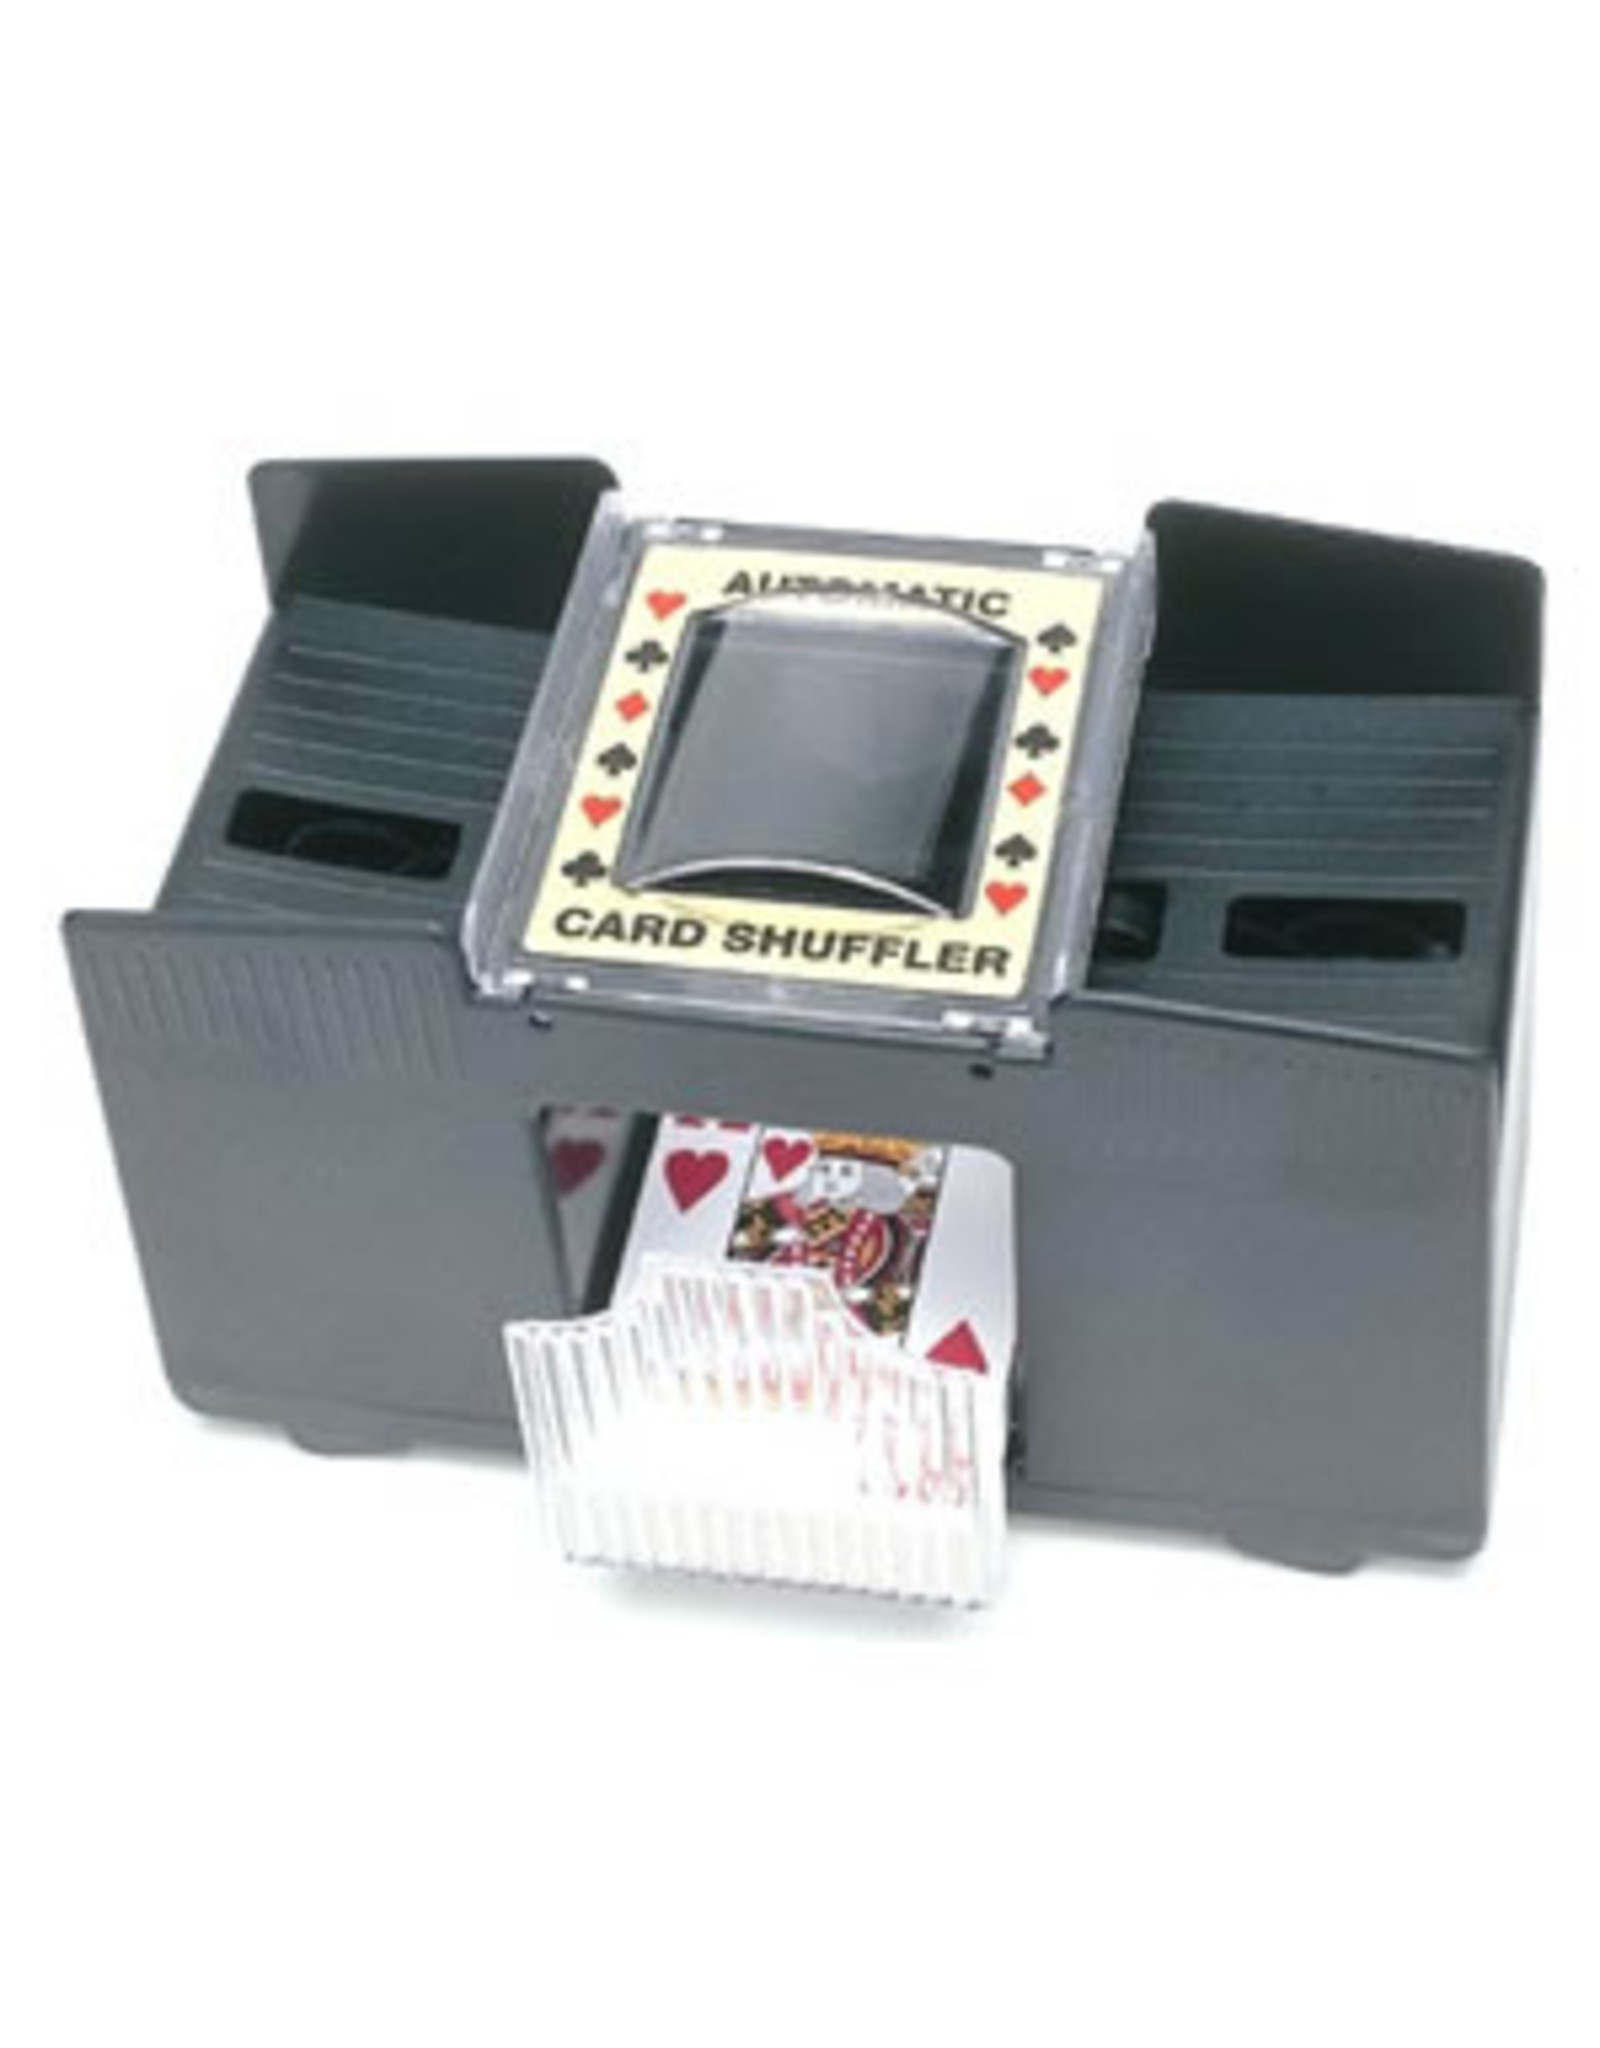 Wood Expressions 4-deck Automatic Card Shuffler (Battery Operated)